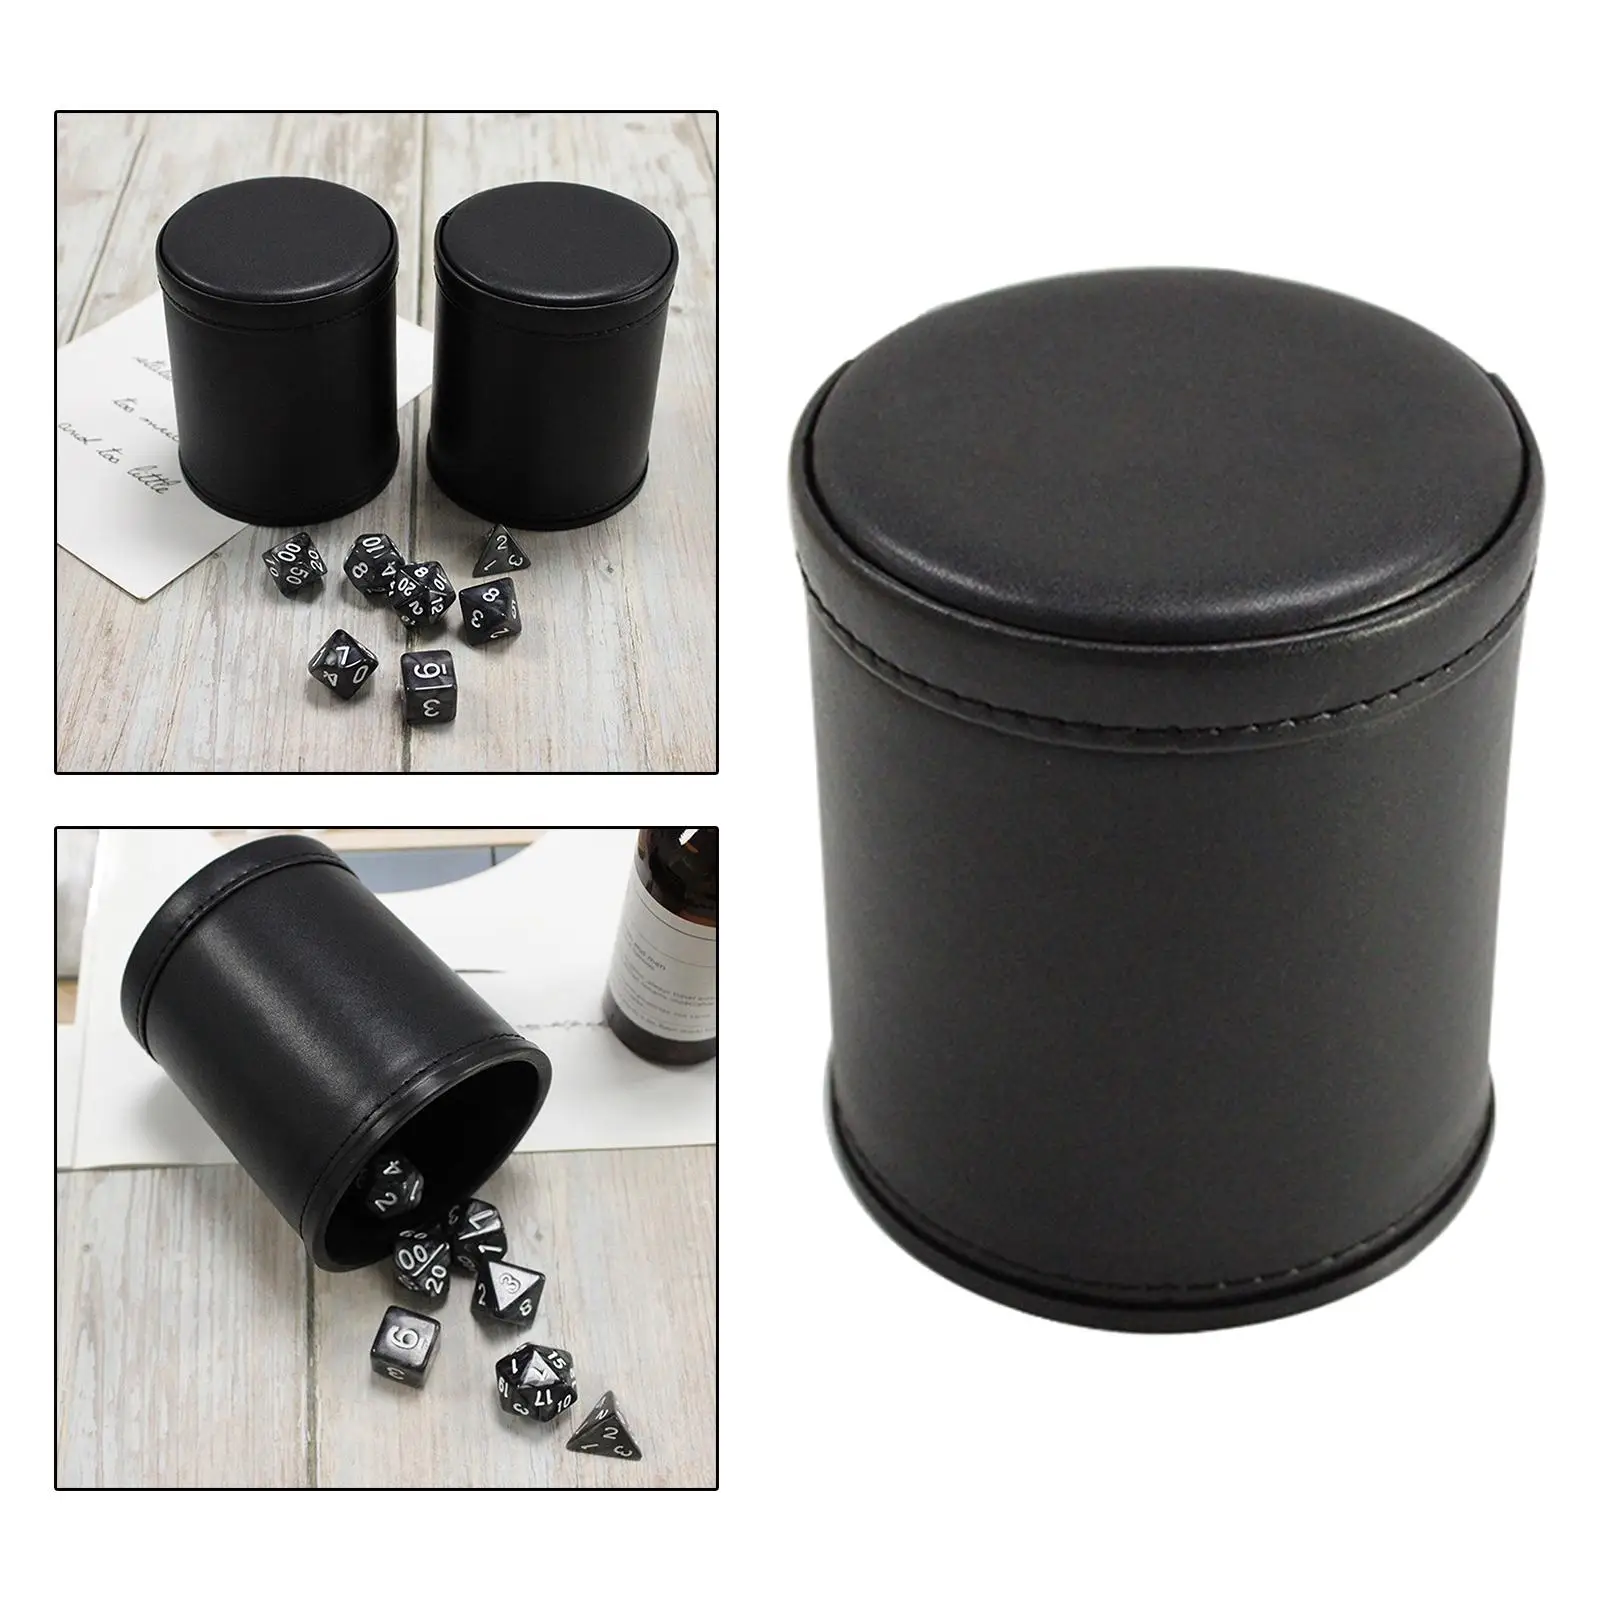 Protable Dice Cup Entertainment Professional Dice Game Supplies Dice Shaker Dice Box for Club Home